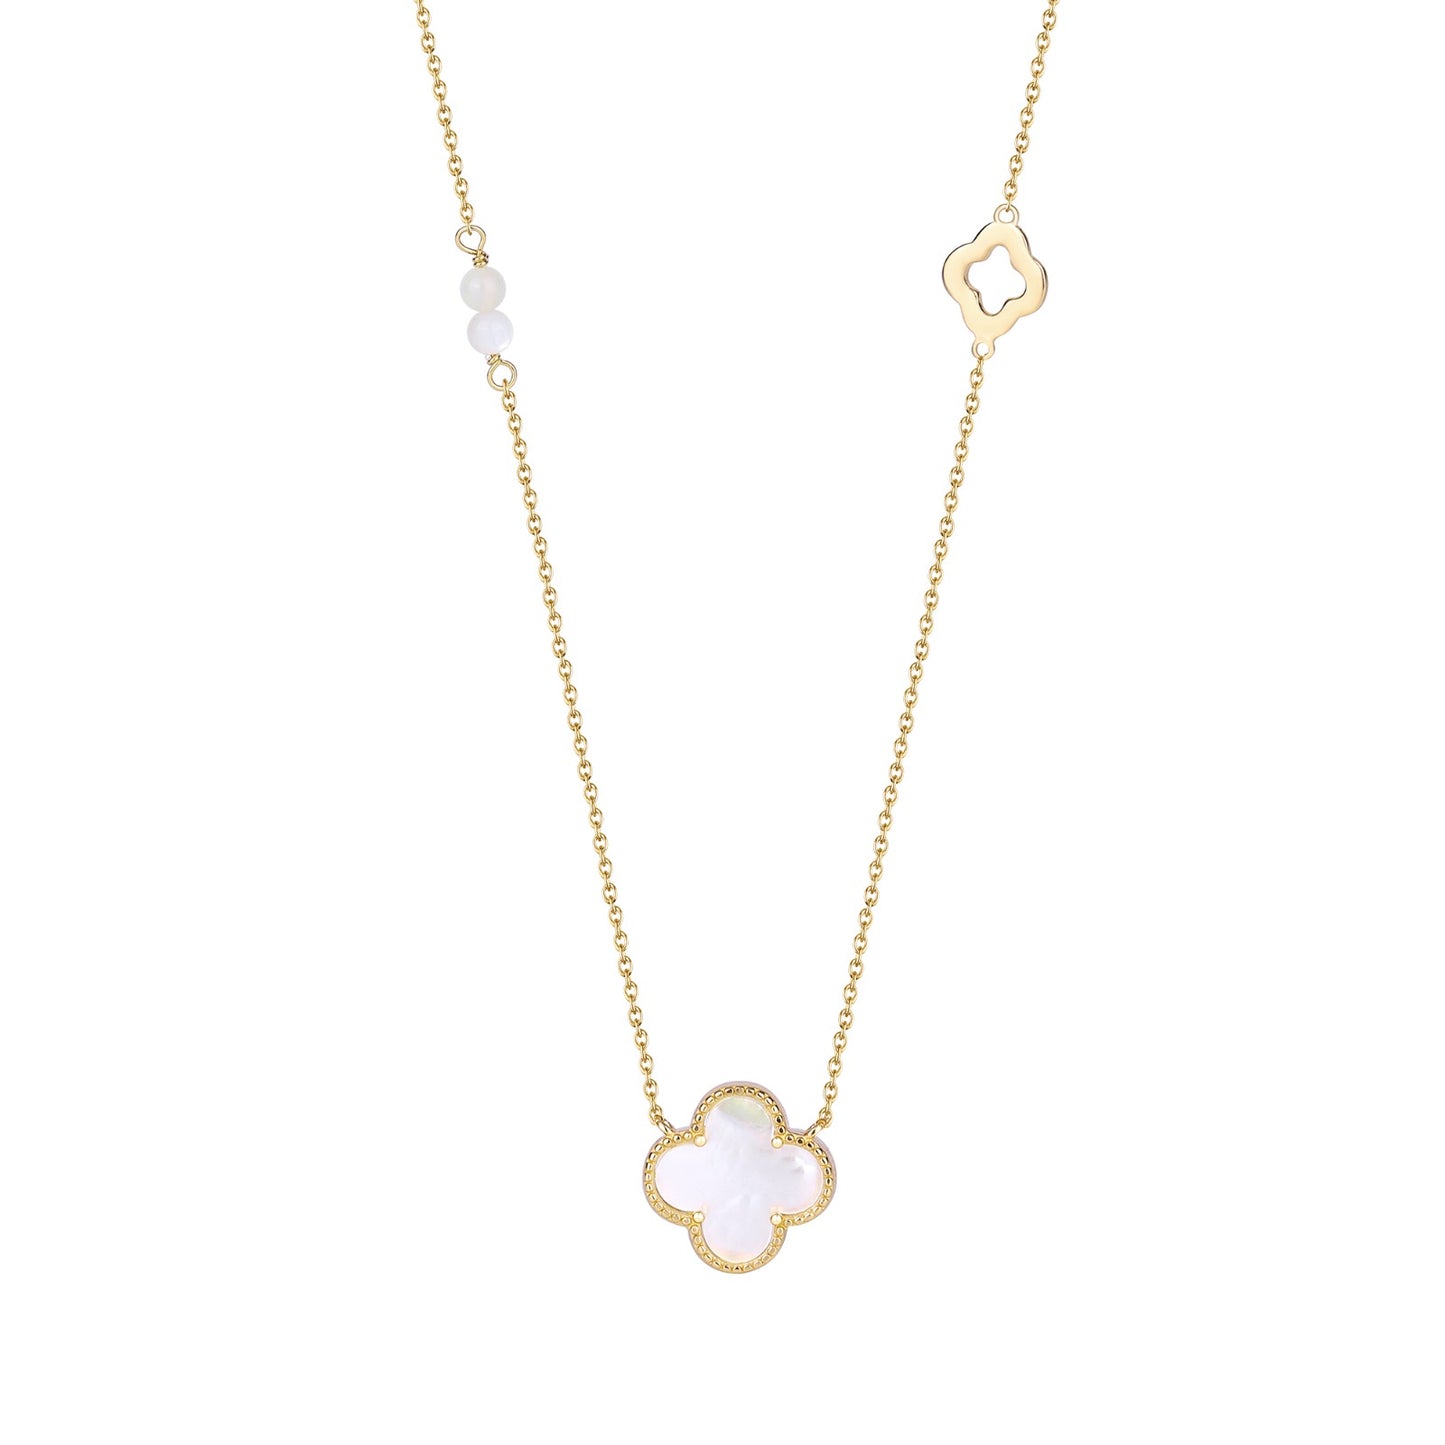 KARA MOTHER OF PEARL CLOVER GOLD NECKLACE